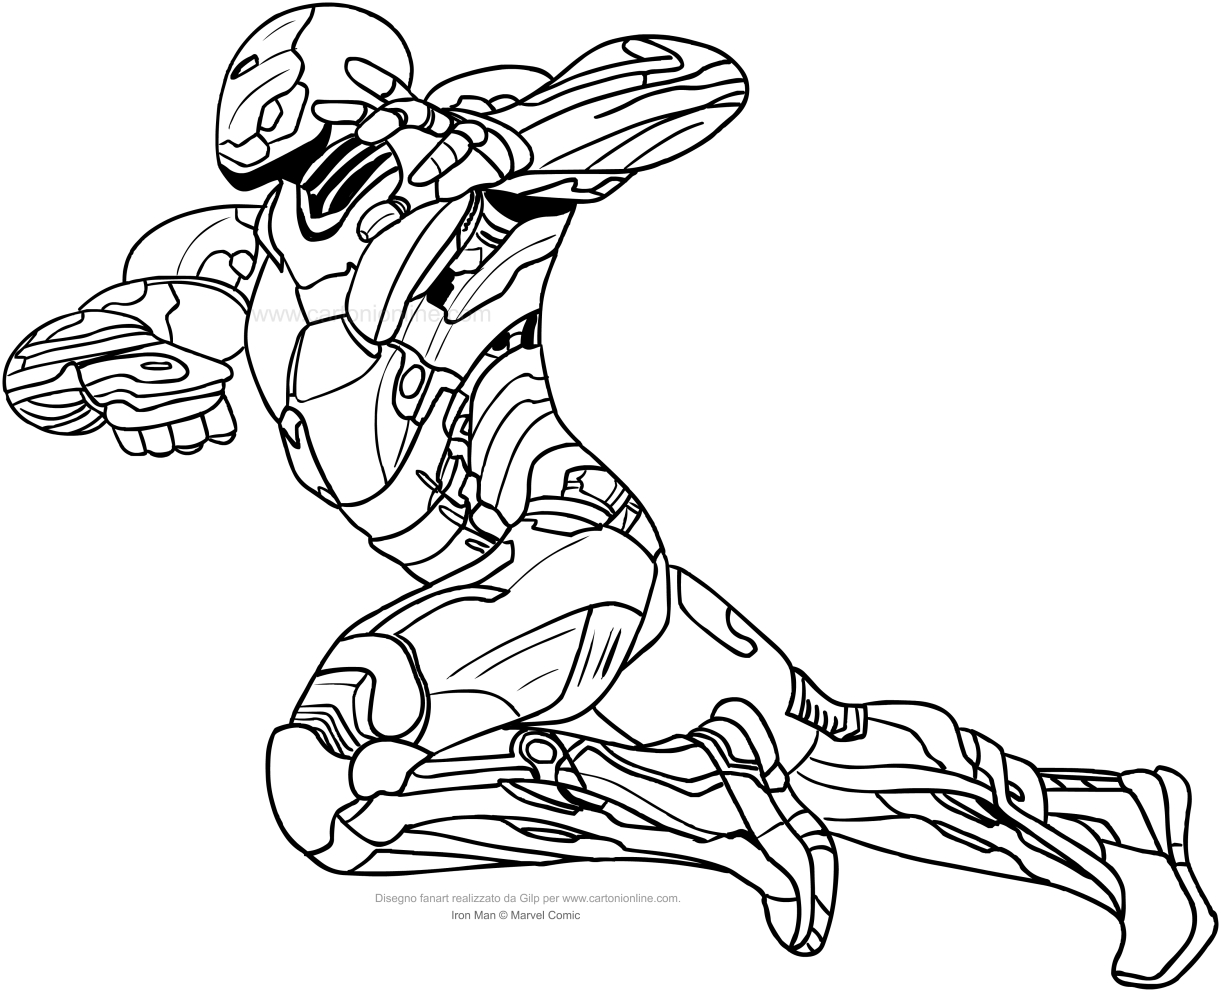 Iron-Man coloring page to print